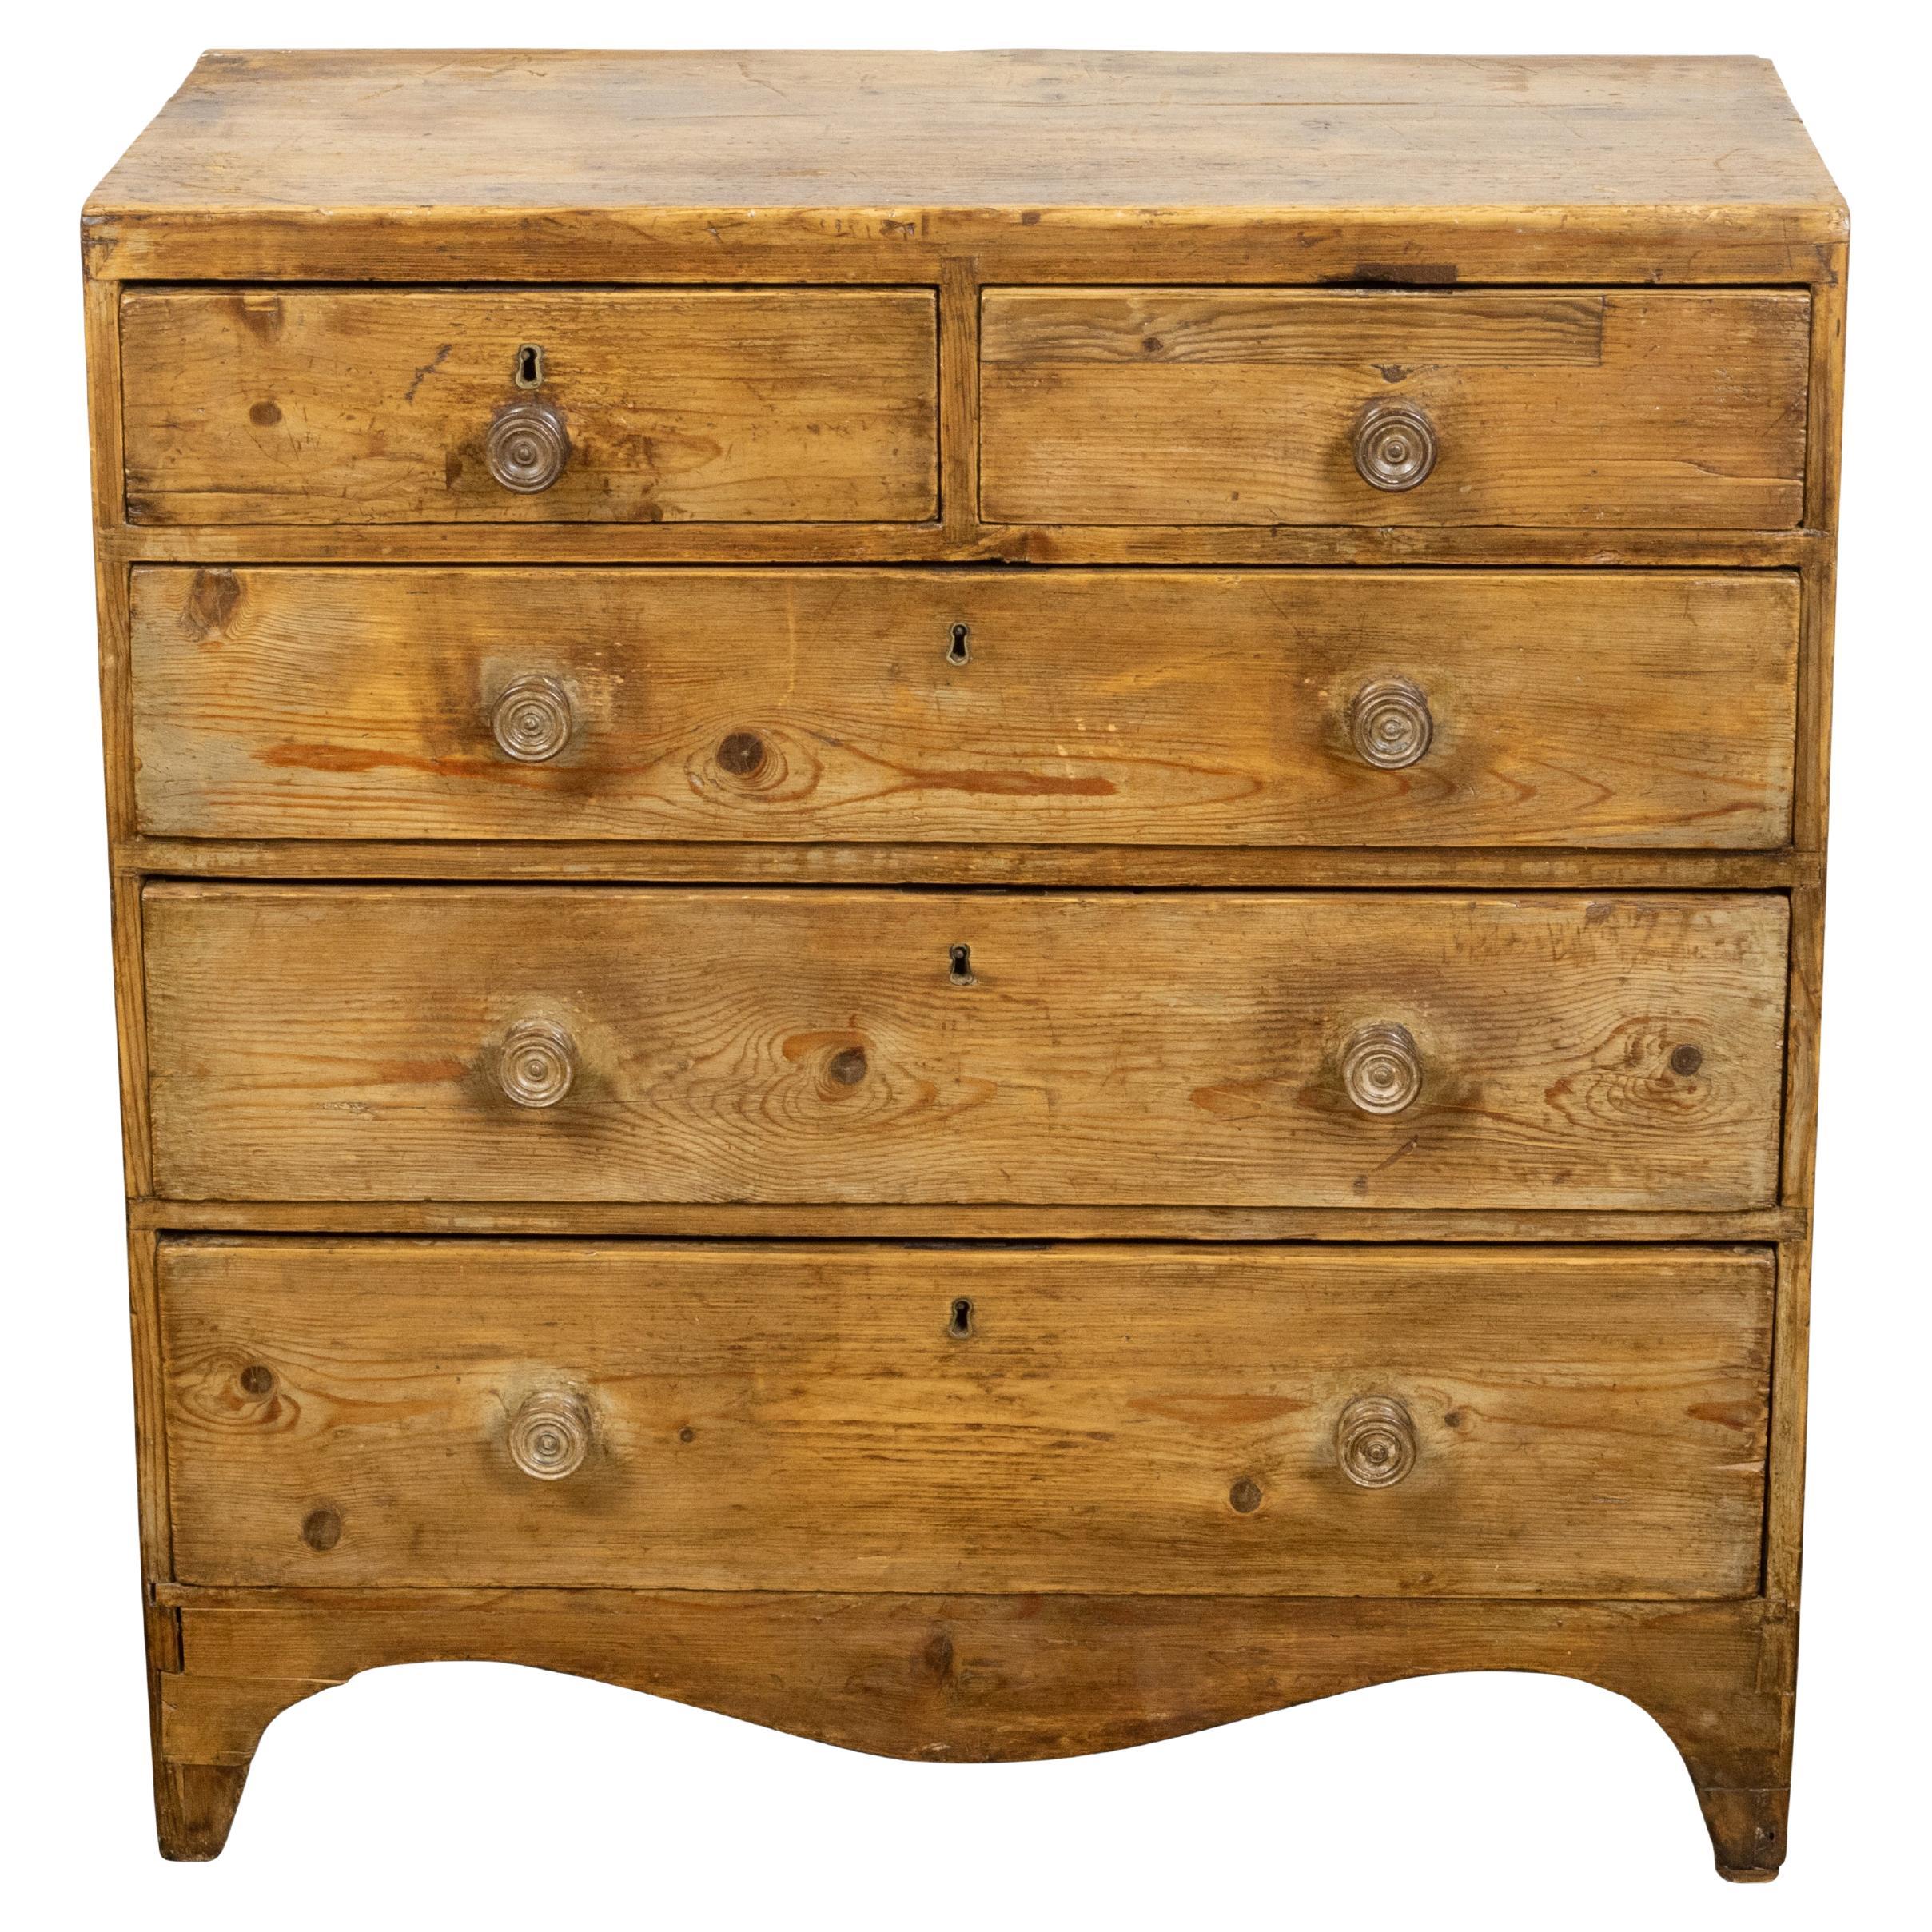 English 1820s Regency Period Pine Chest with Five Graduated Drawers and Patina